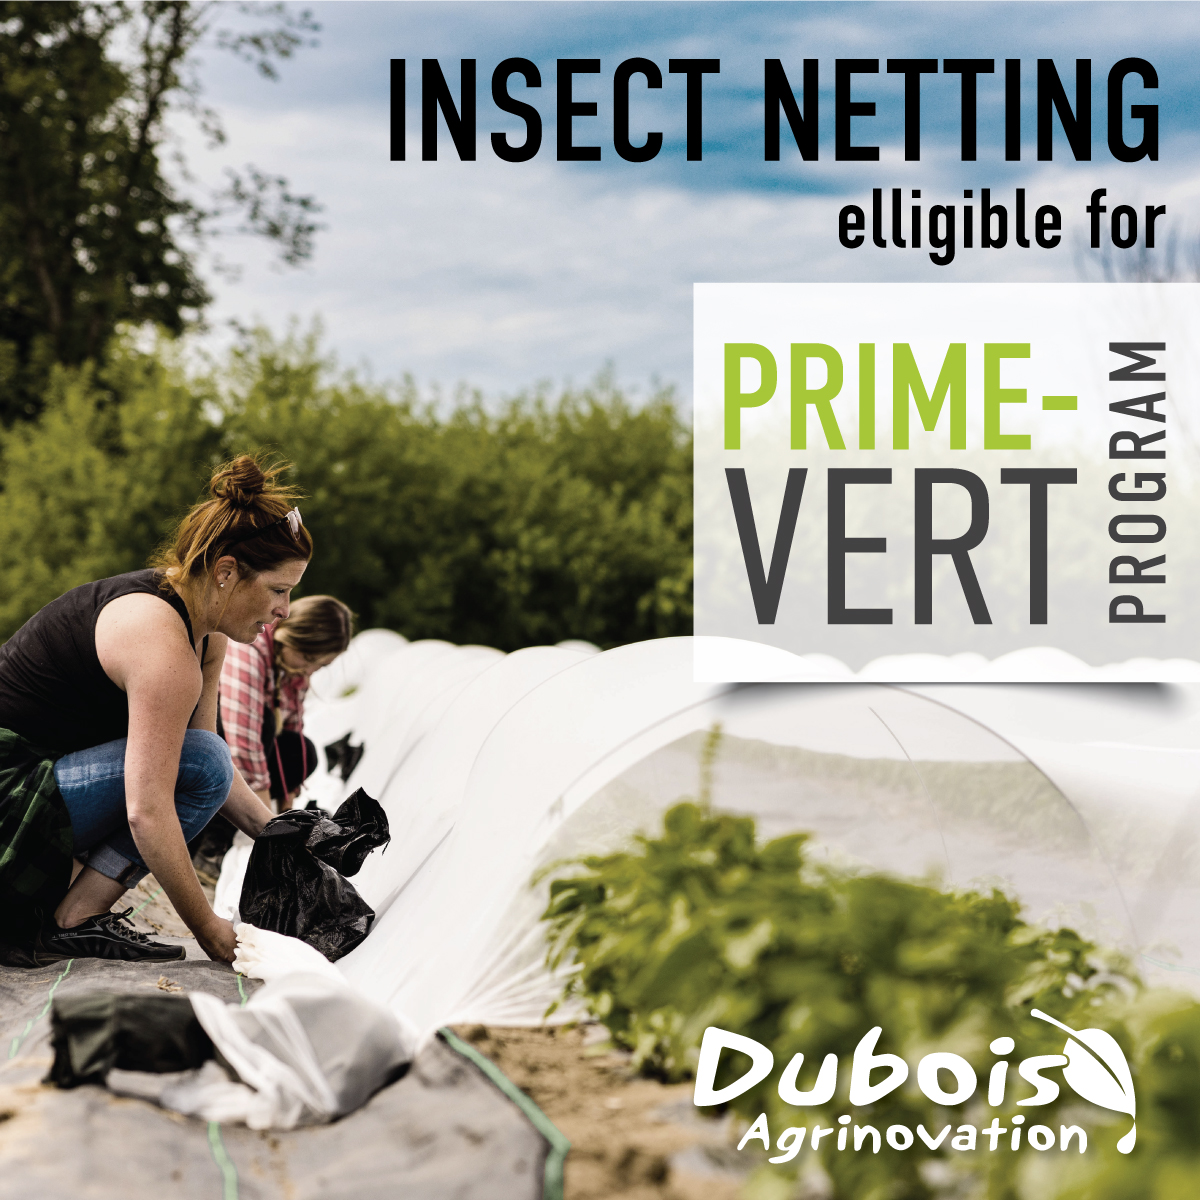 Anti-insect nets covered by Prime-Vert